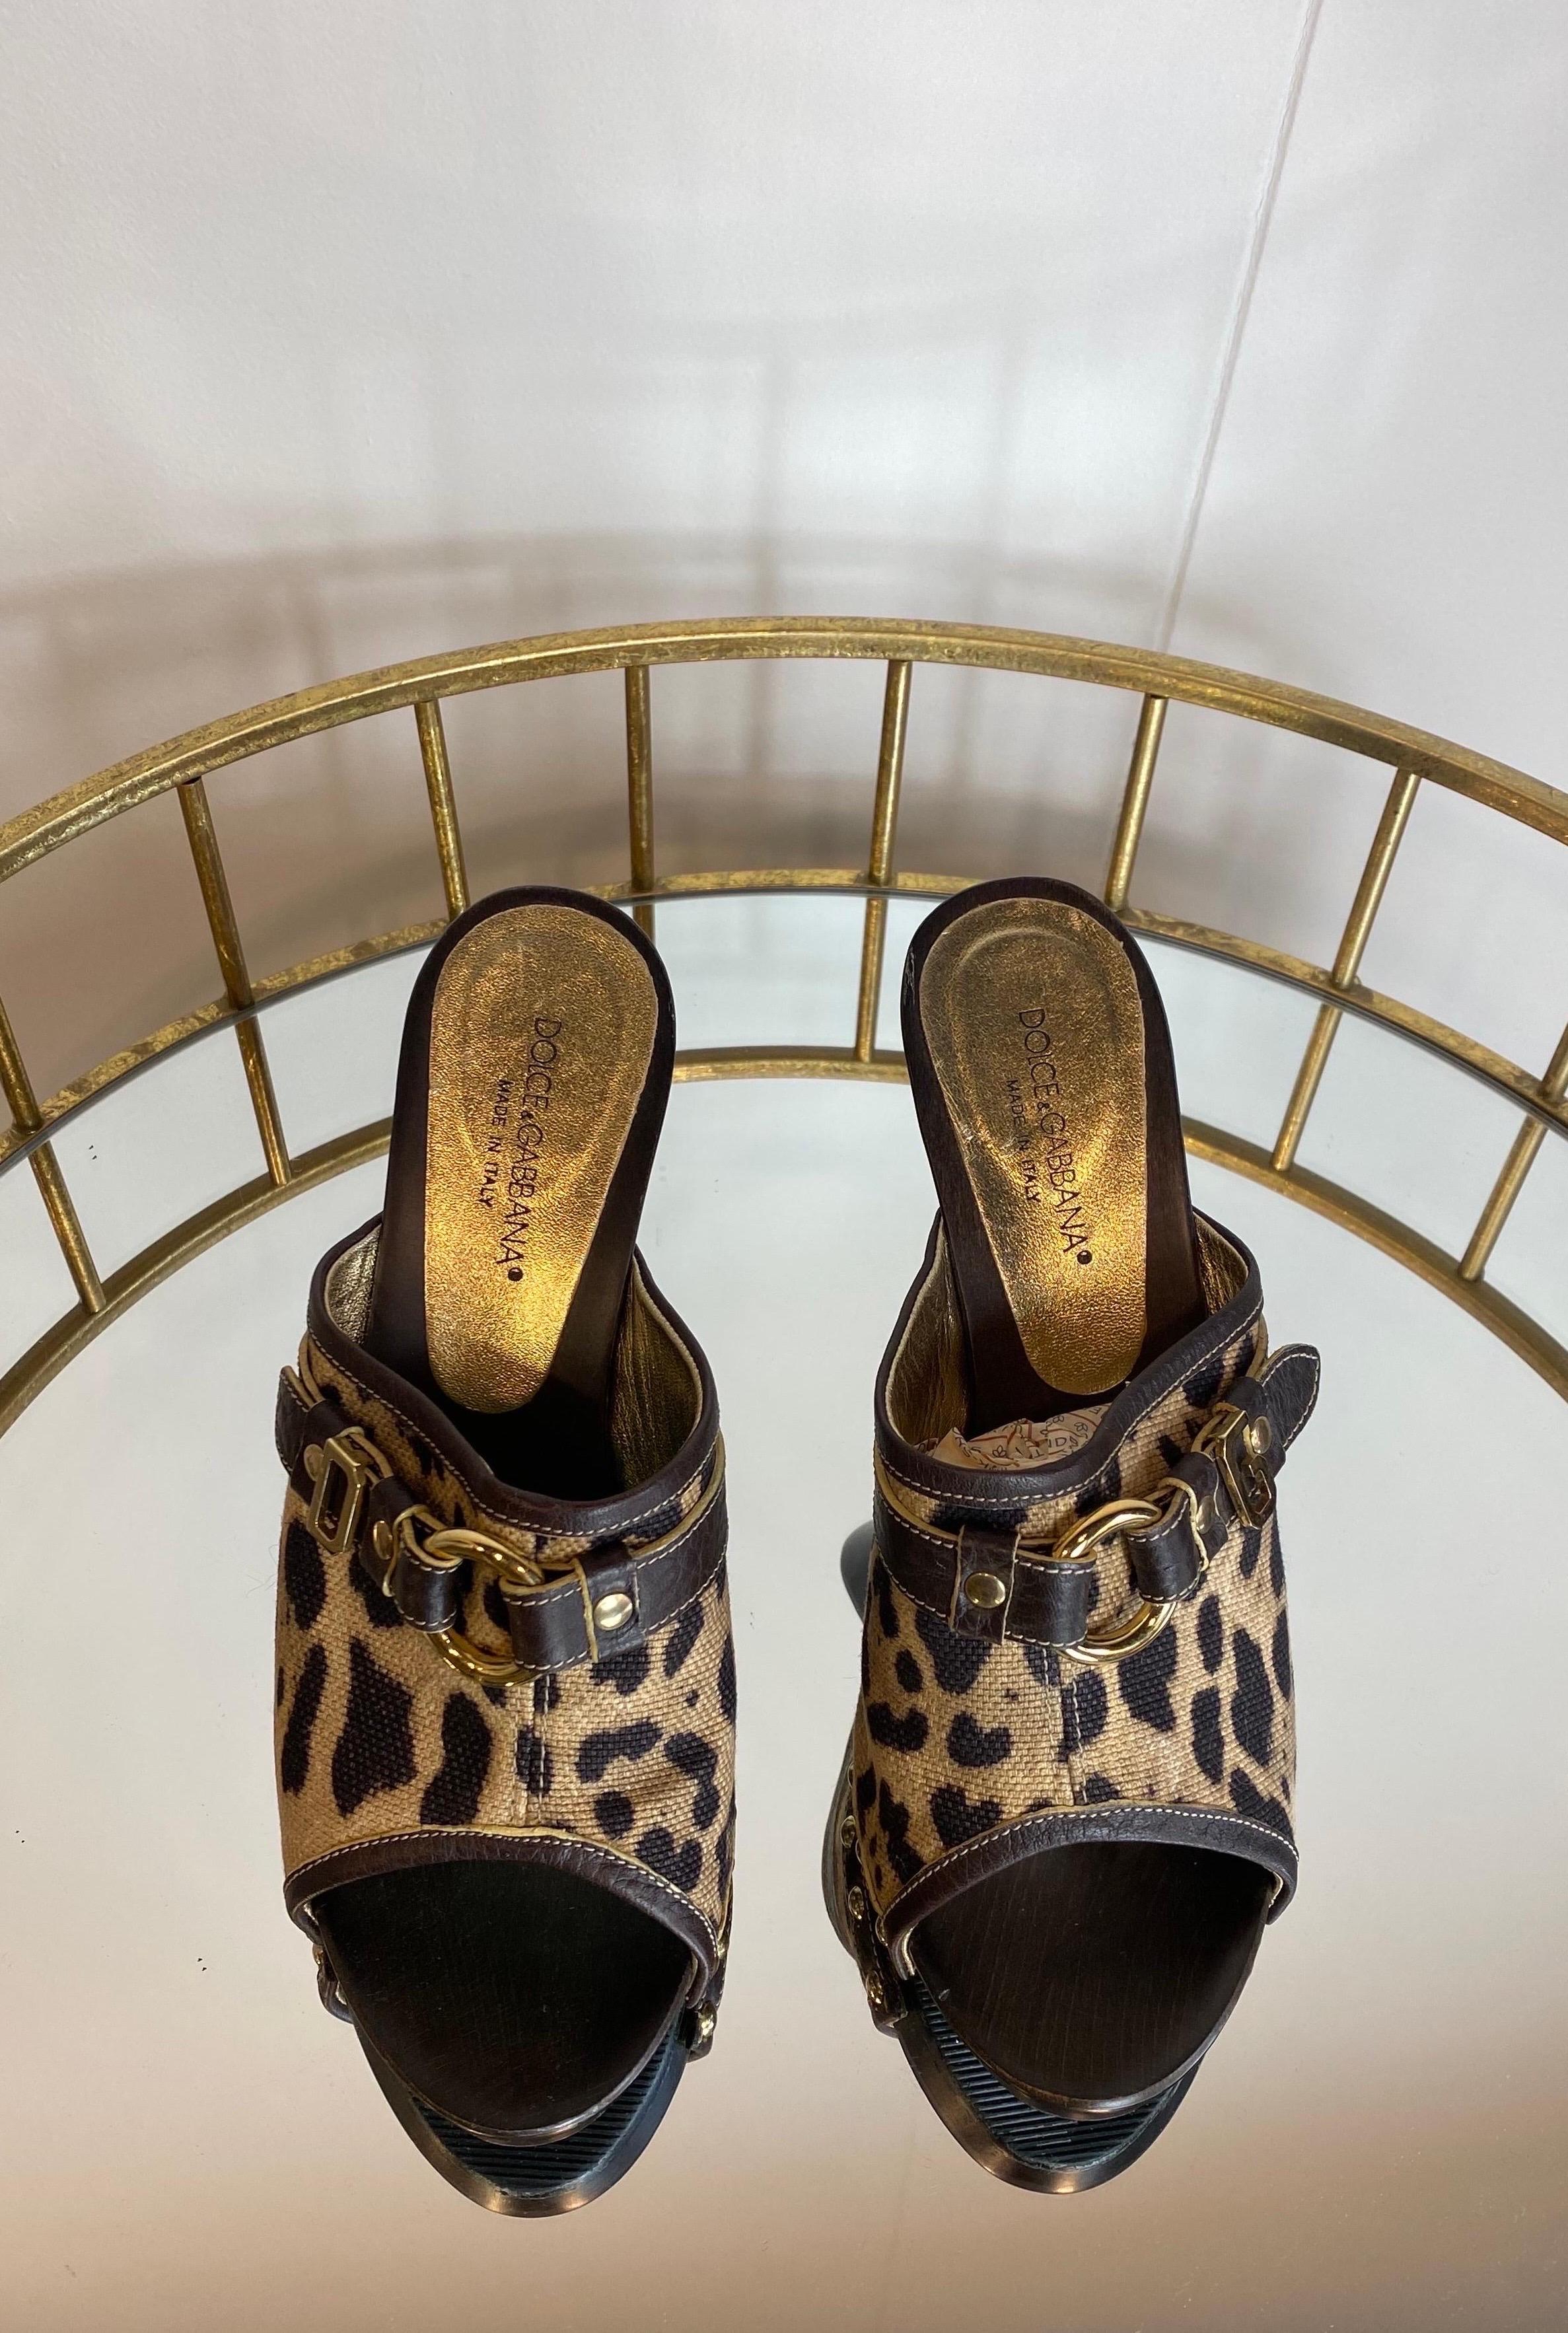 Dolce and Gabbana Leopard print Clogs In Excellent Condition In Carnate, IT